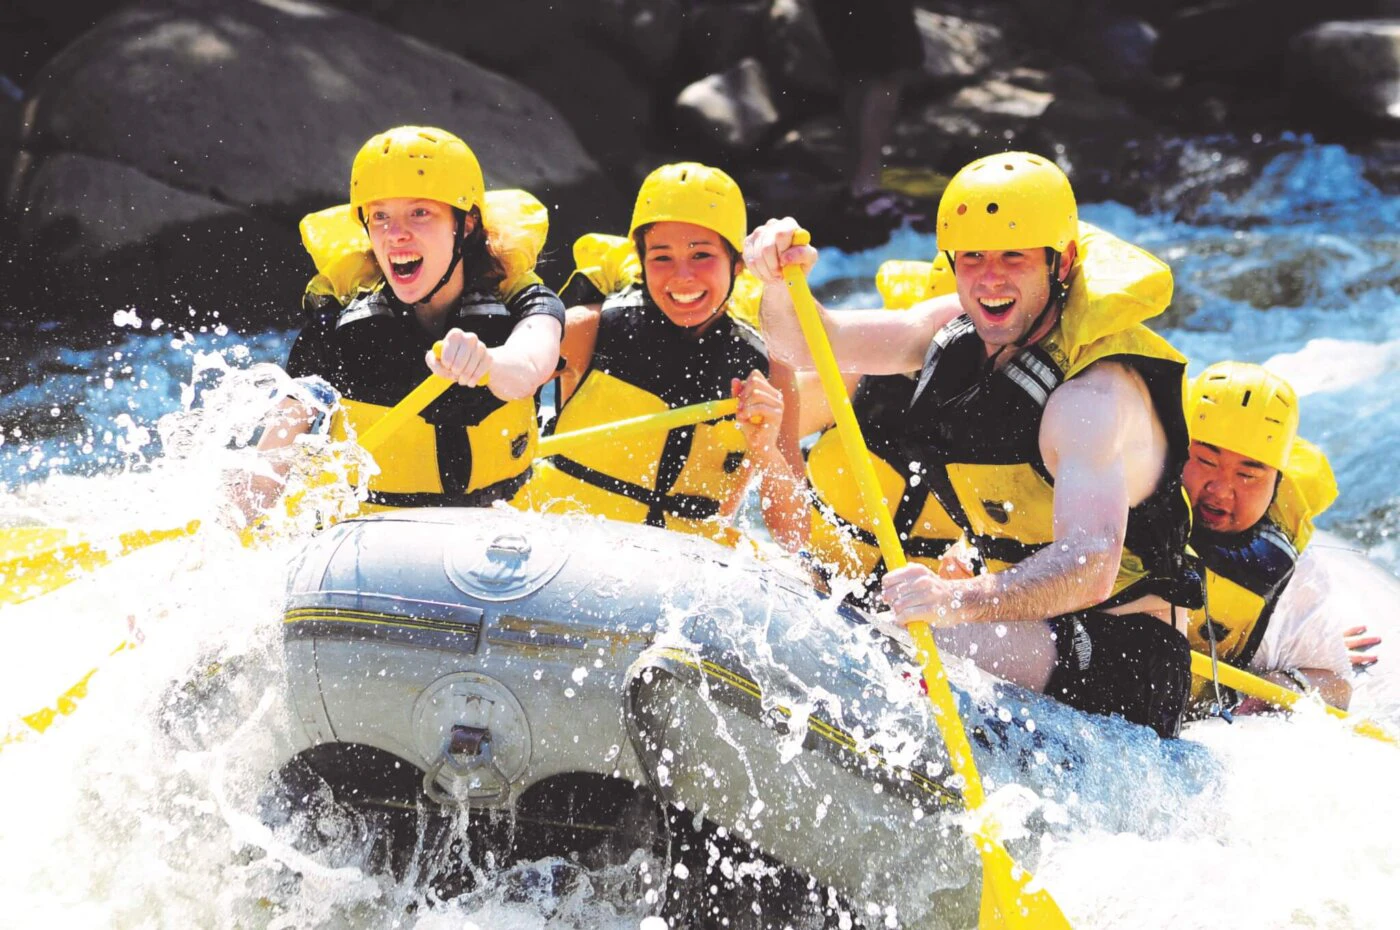 Whitewater rafting on the Youghiogheny River. (Photo: GO Laurel Highlands)